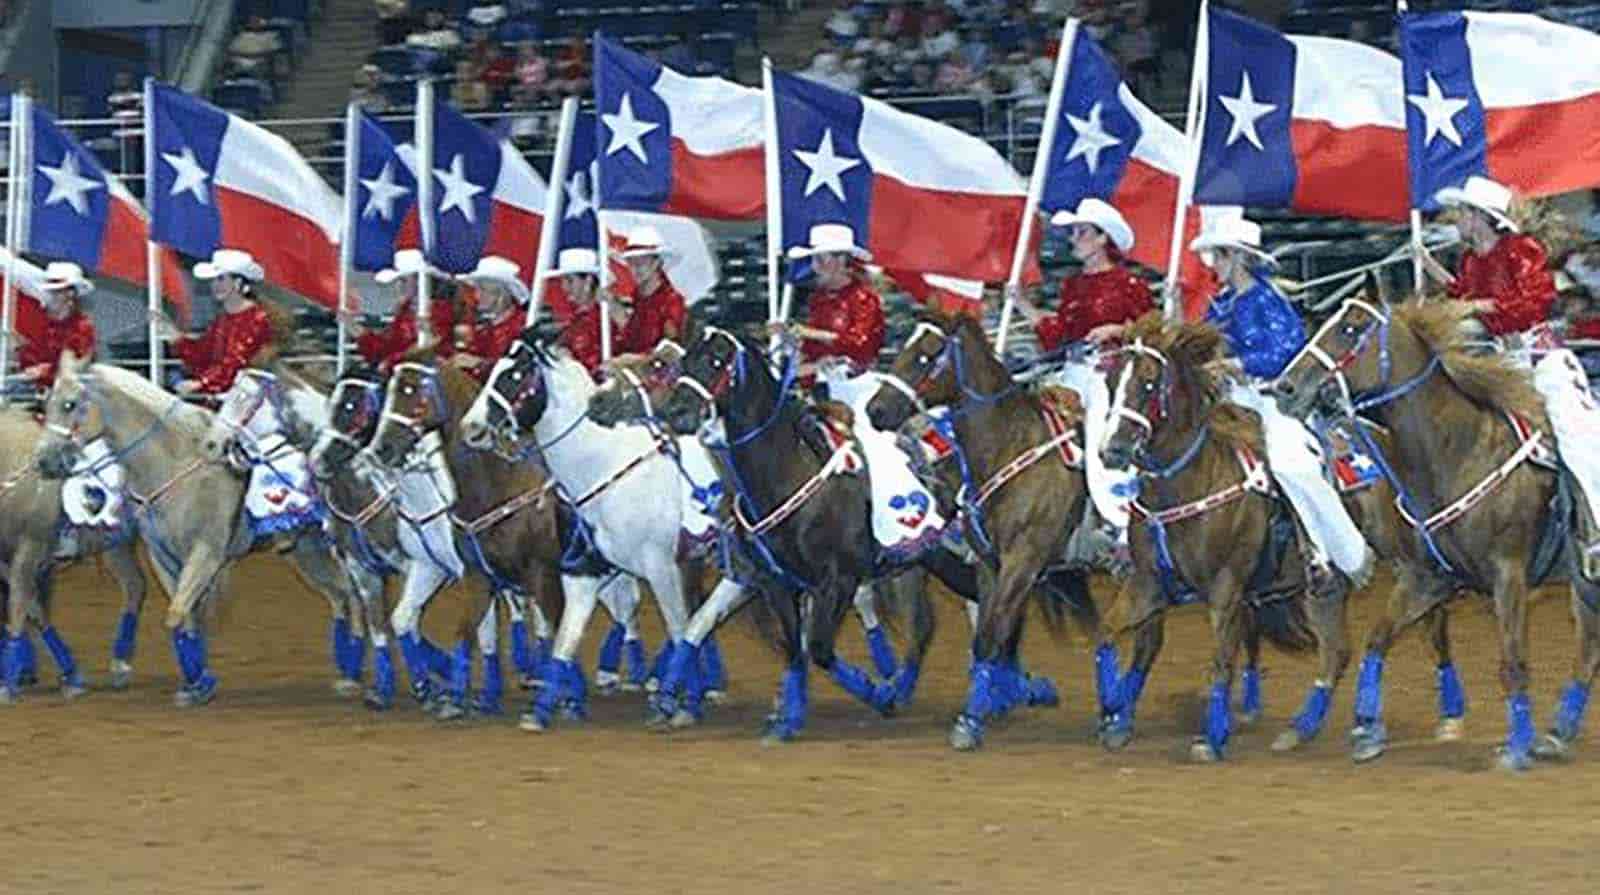 Mesquite Championship Rodeo Tickets